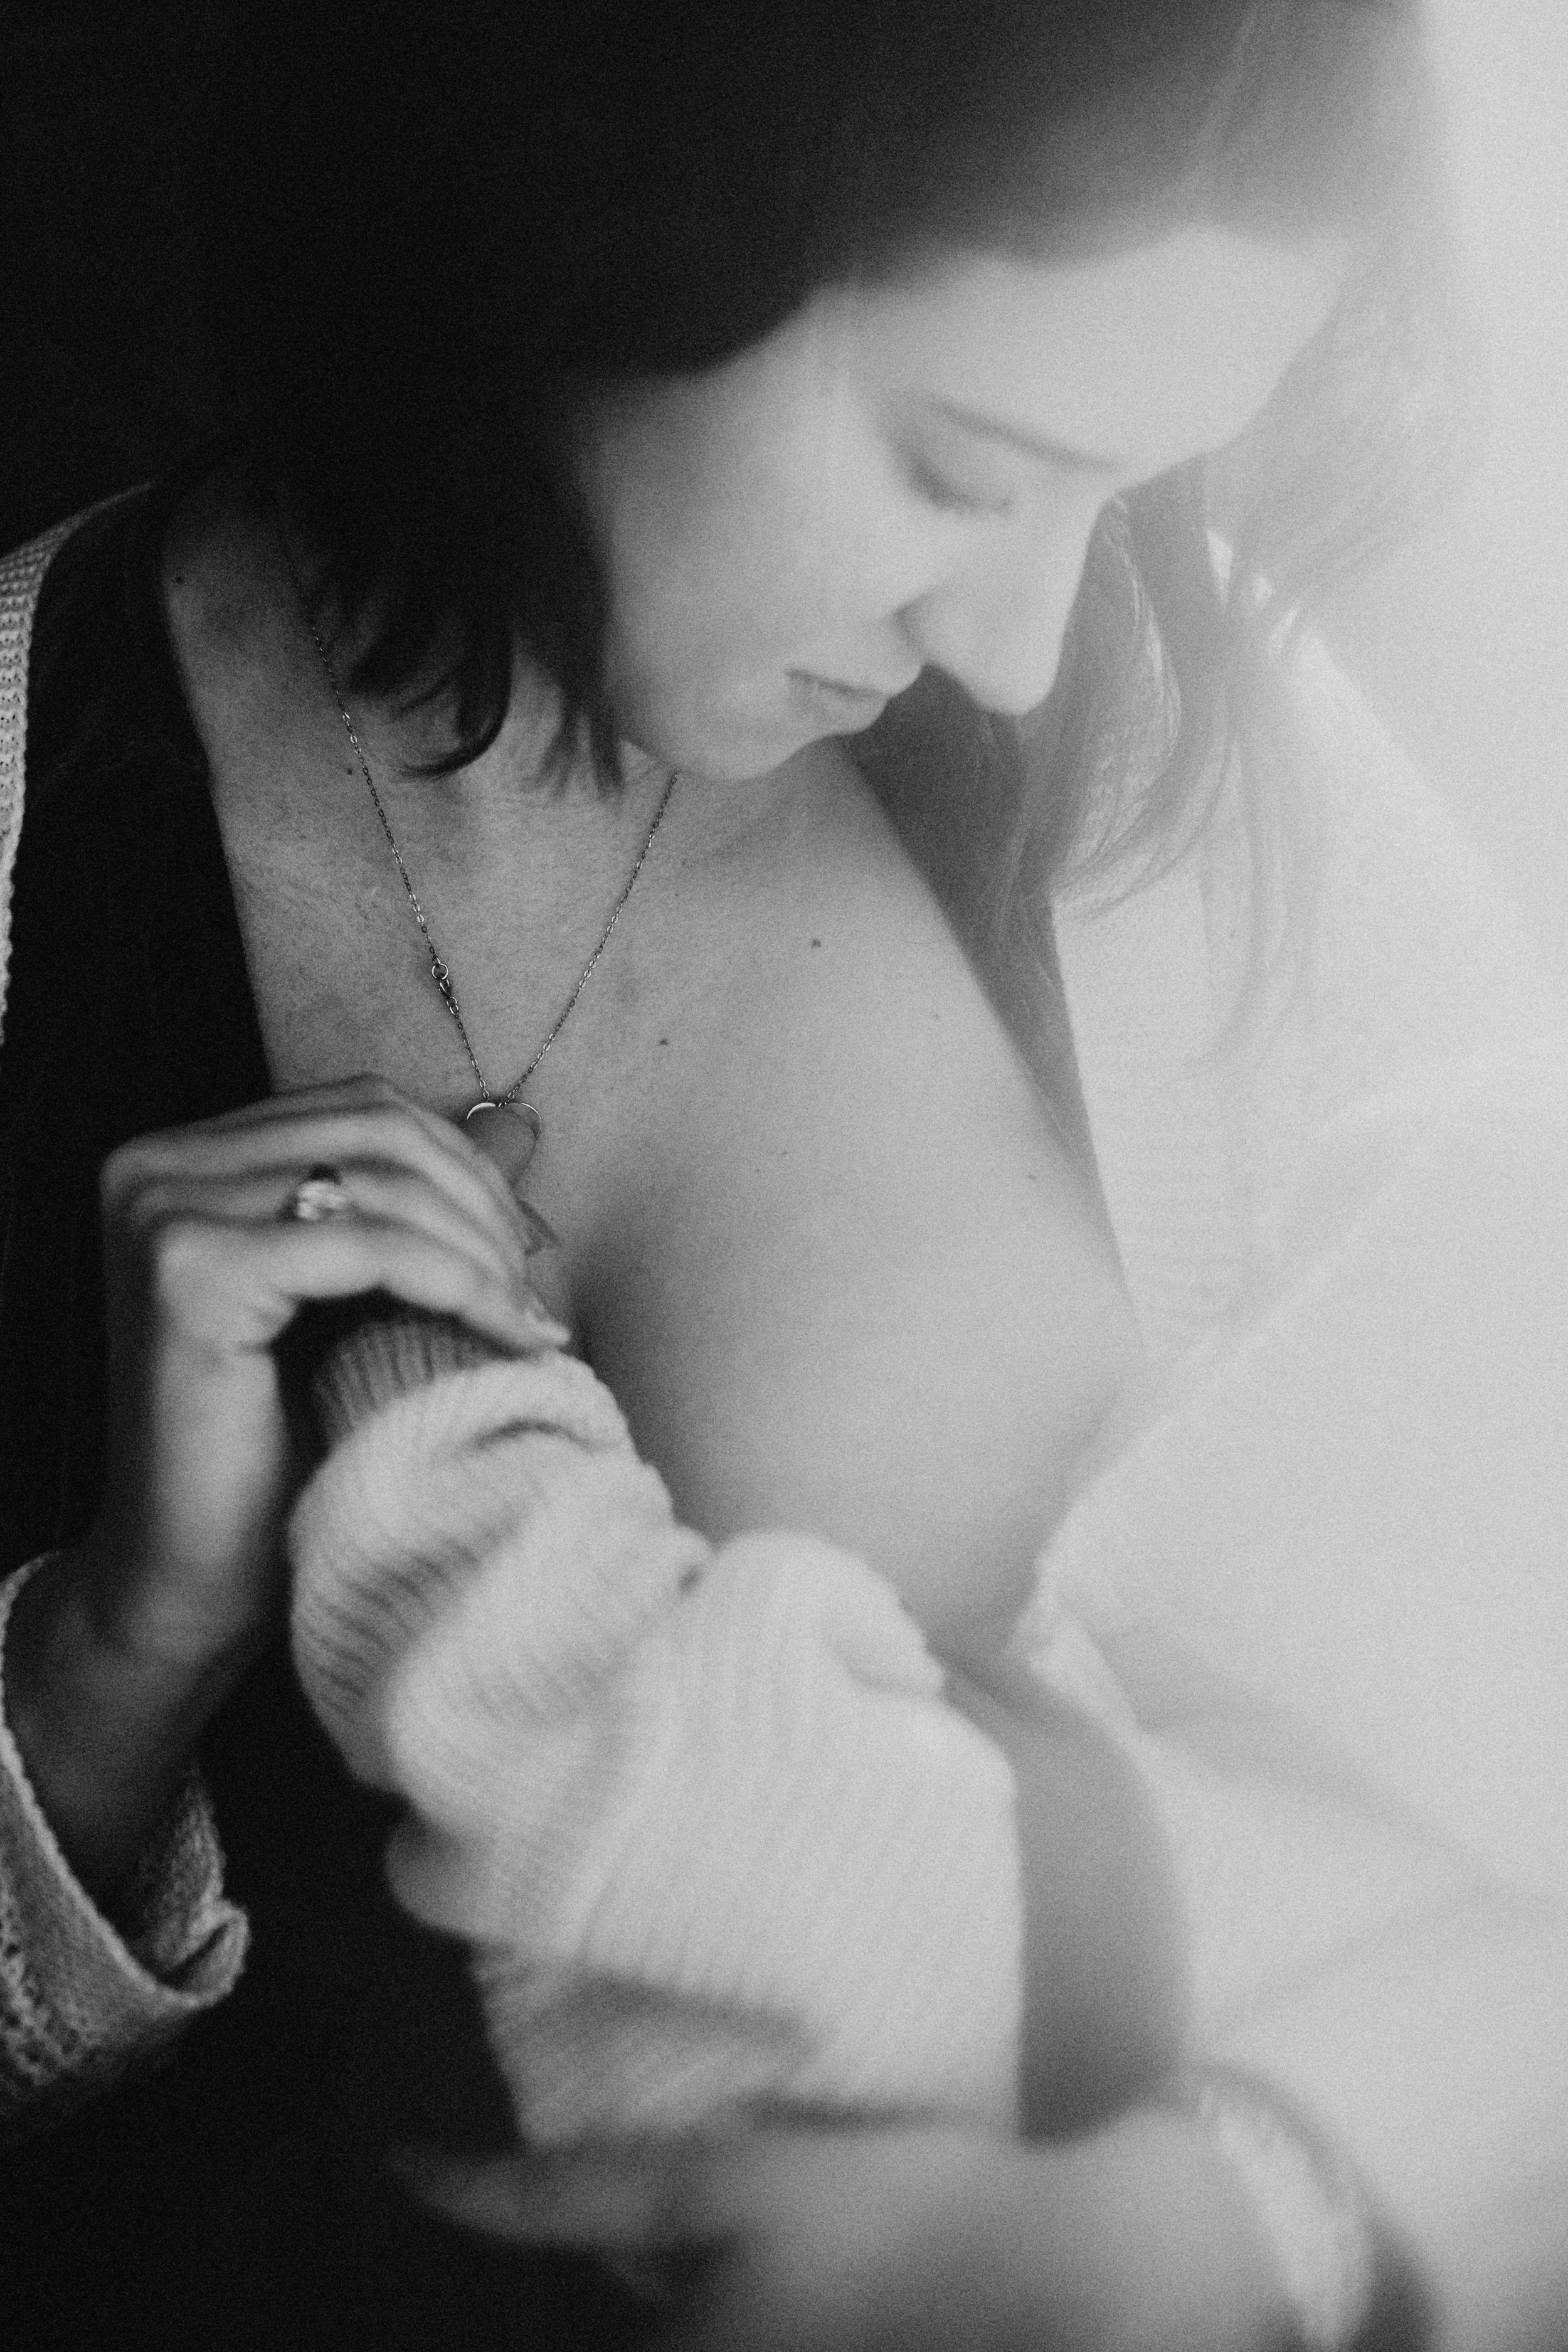  Black and white portrait of a mother breastfeeding her baby while holding her hand by Teala Ward Photography. breast-feeding #TealaWardPhotography #TealaWardNursing #StarvedRockStatePark #nursingbaby #breastfedbabyphotography #motherandbaby 